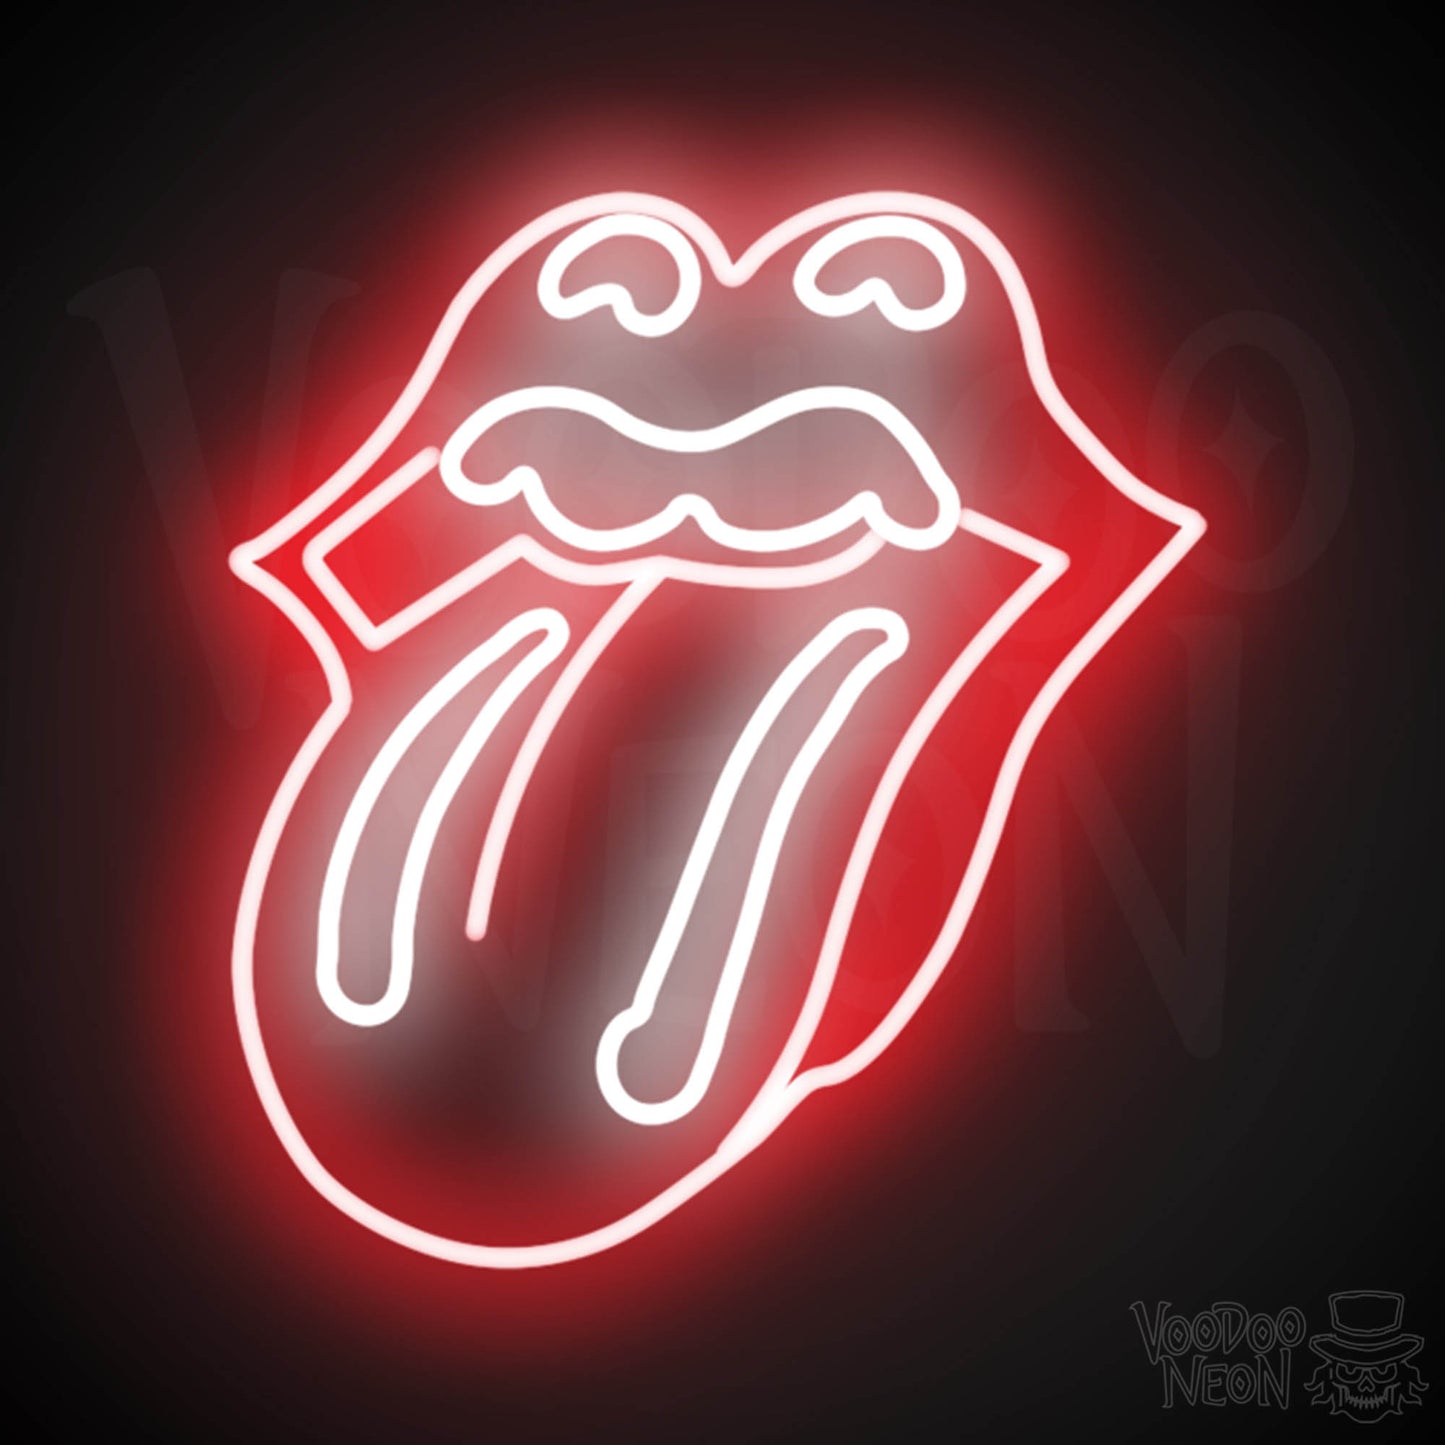 Rolling Stones Neon Sign - Rolling Stones Sign - Neon Rolling Stones Logo Wall Art - Color Multi-Color